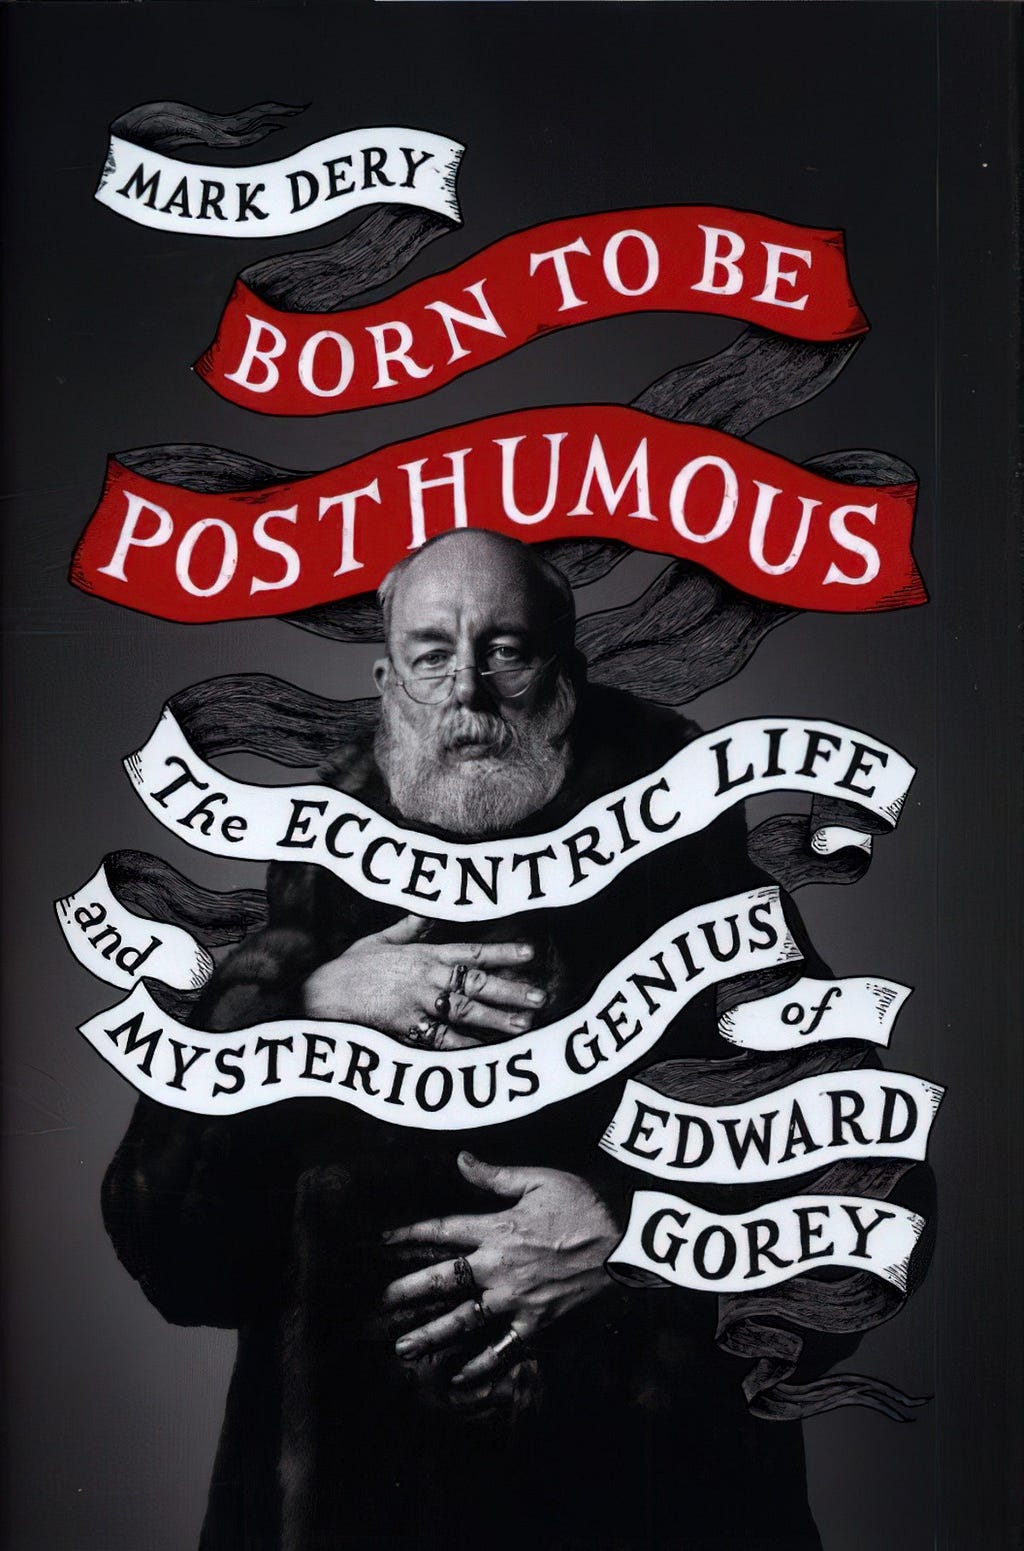 The book cover to Posthumous: The Eccentric Life and Mysterious Genius of Edward Gorey by Mark Dery. The photo is of a mock-serious looking Gorey looking at the camera. He wears one of infamous fur coats, before he gave up wearing them. His many rings are on display.